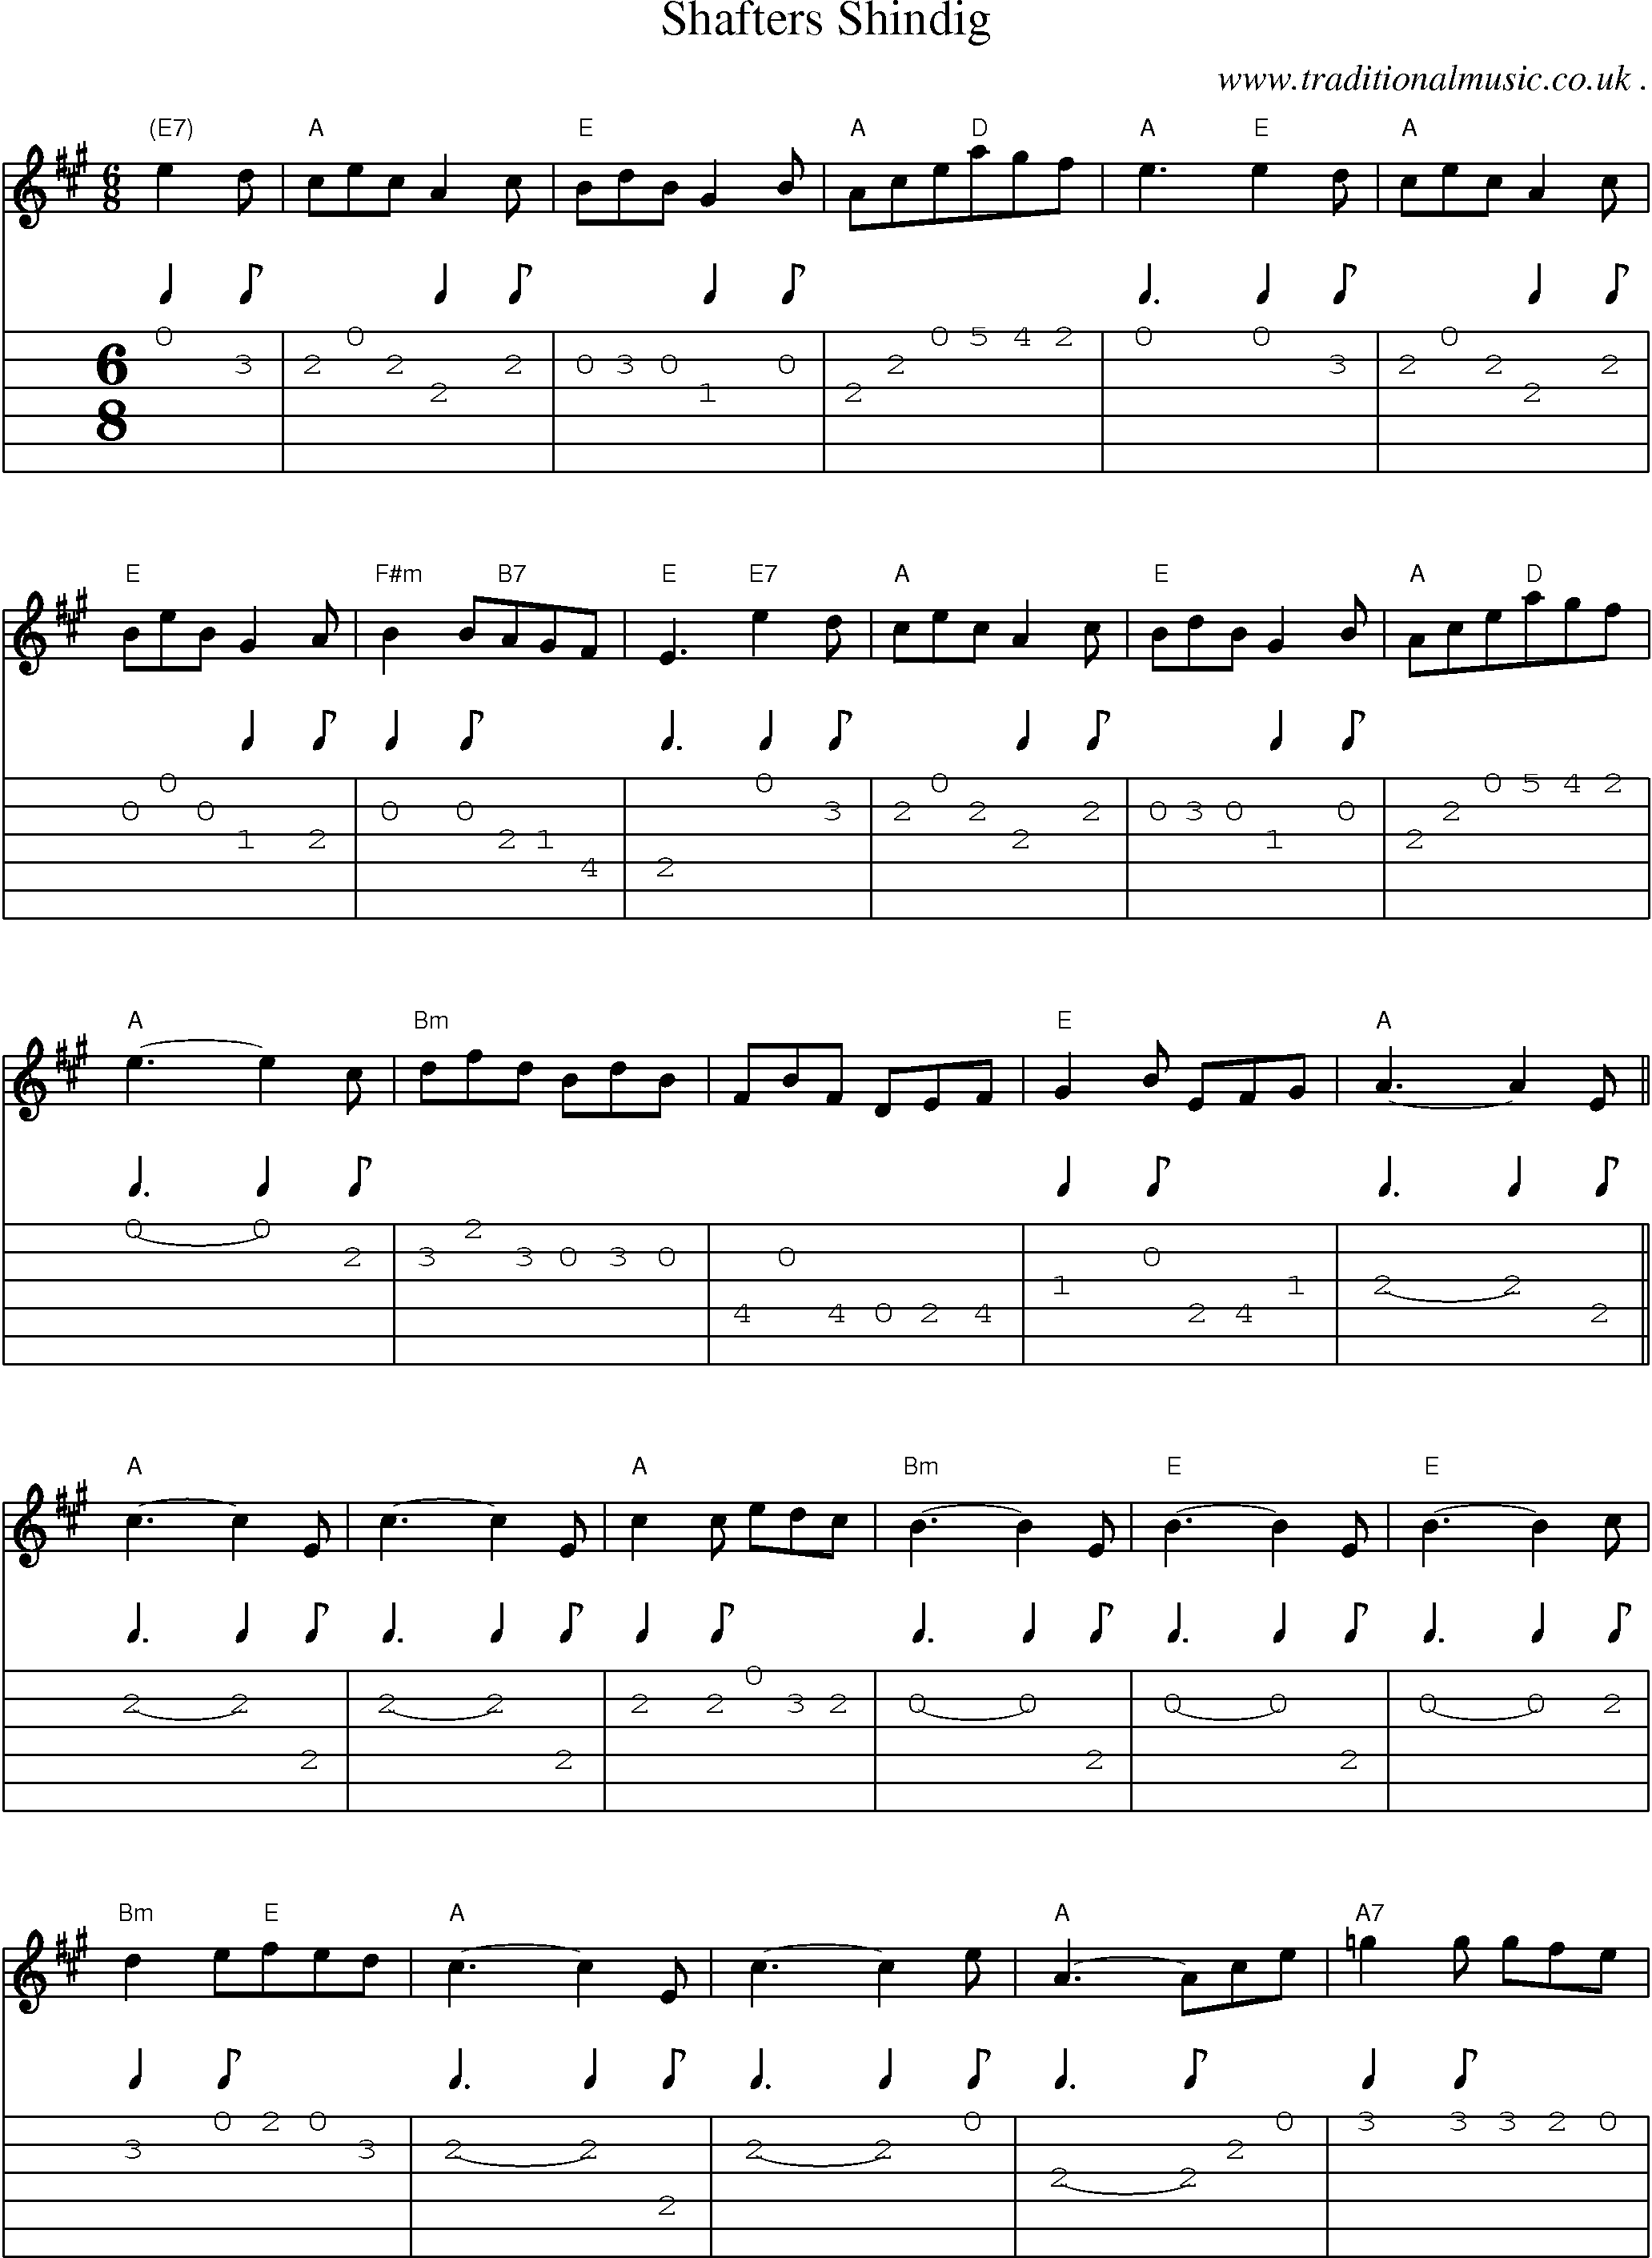 Sheet-Music and Guitar Tabs for Shafters Shindig